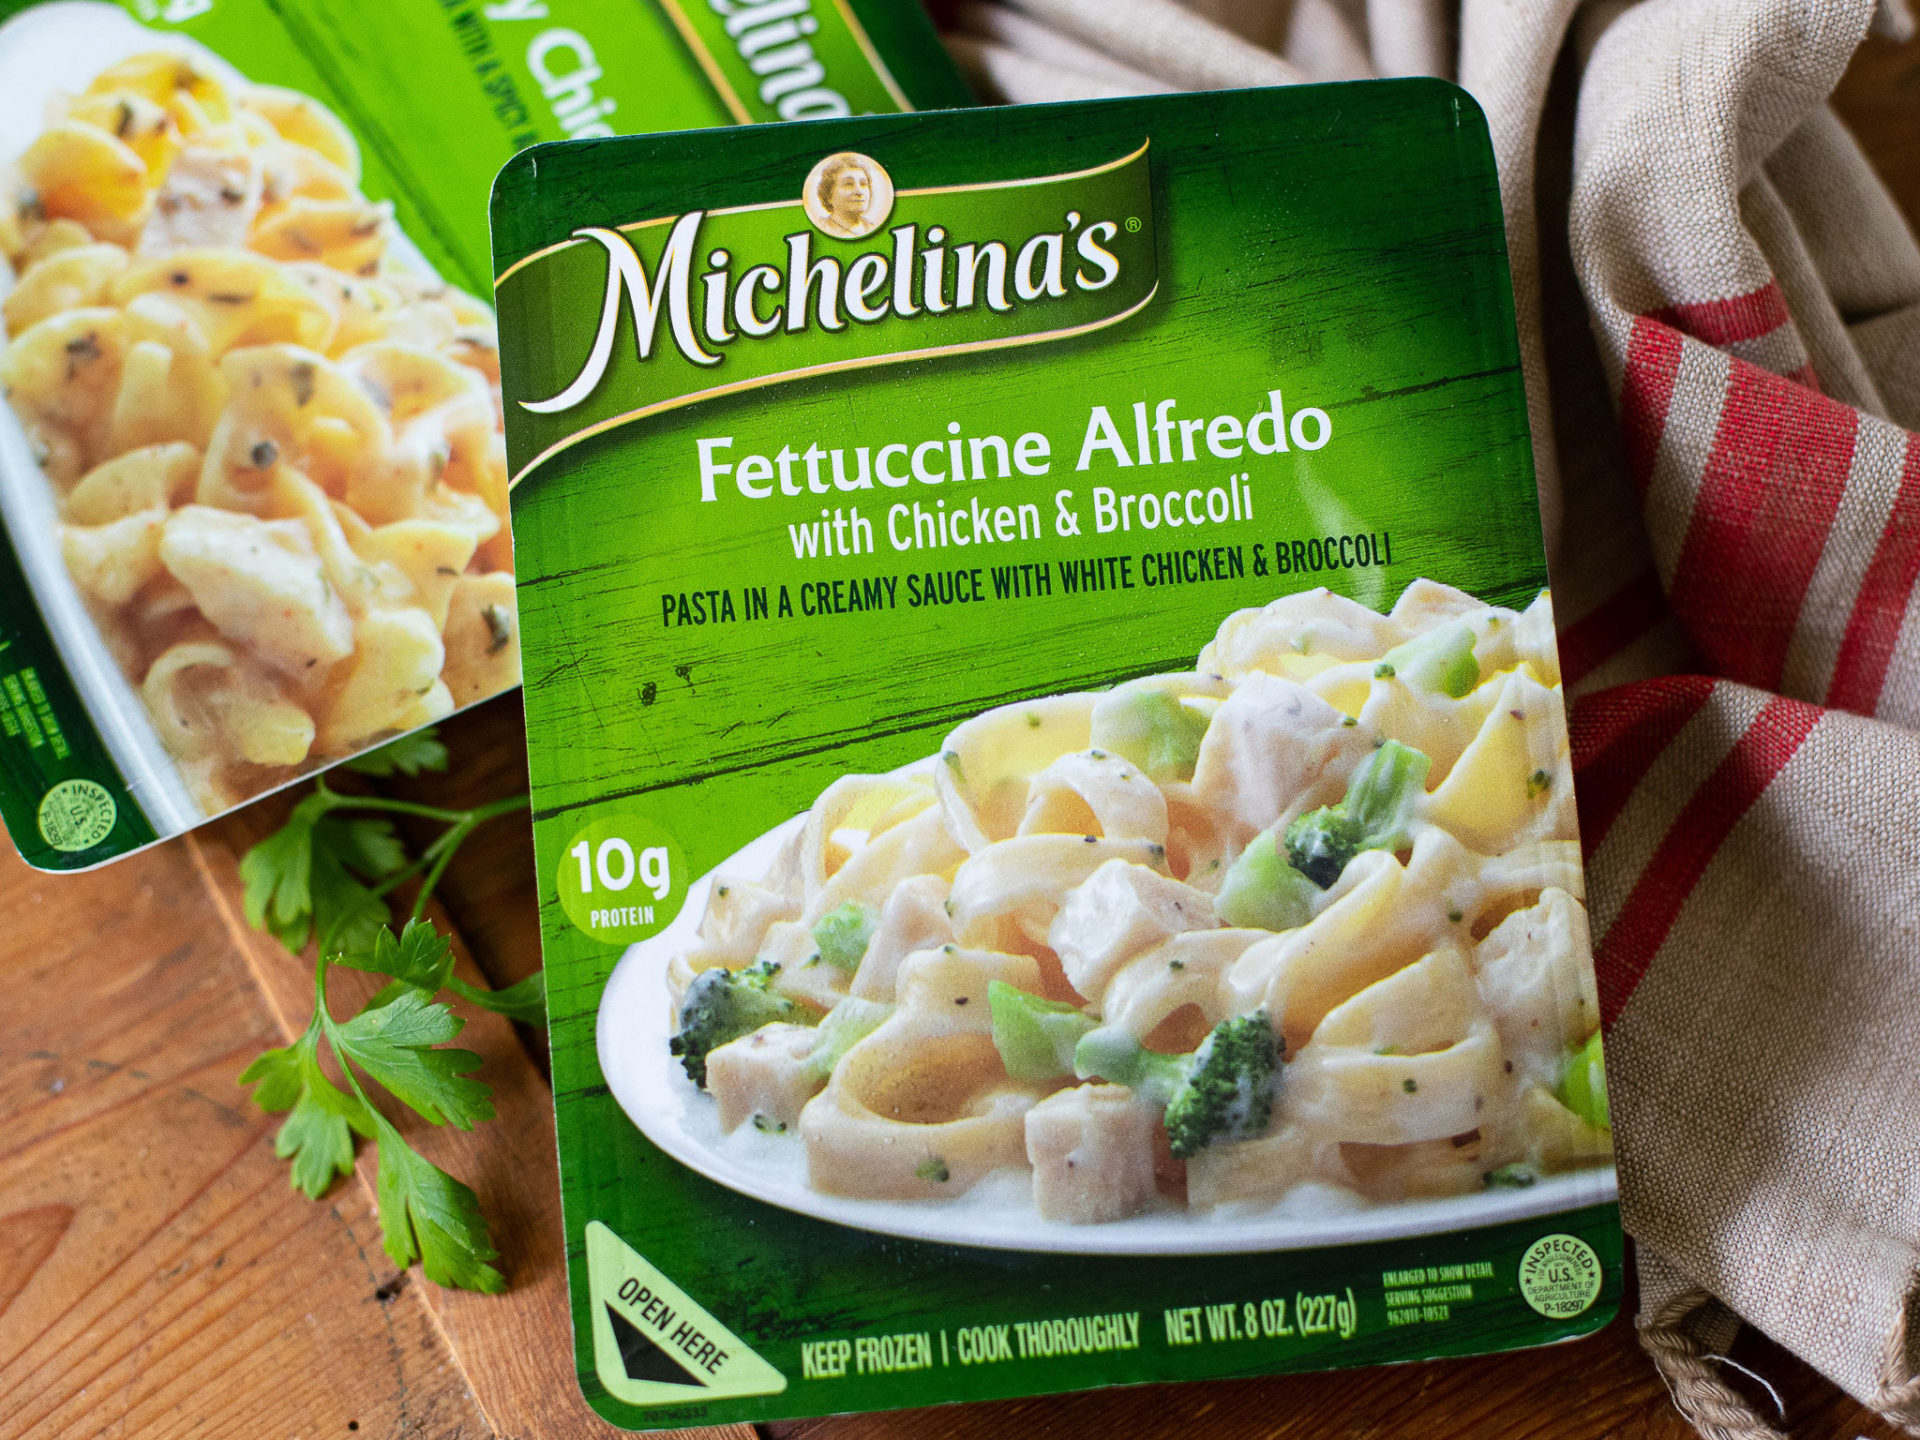 Michelina’s Frozen Entrees Are Just 99¢ At Kroger